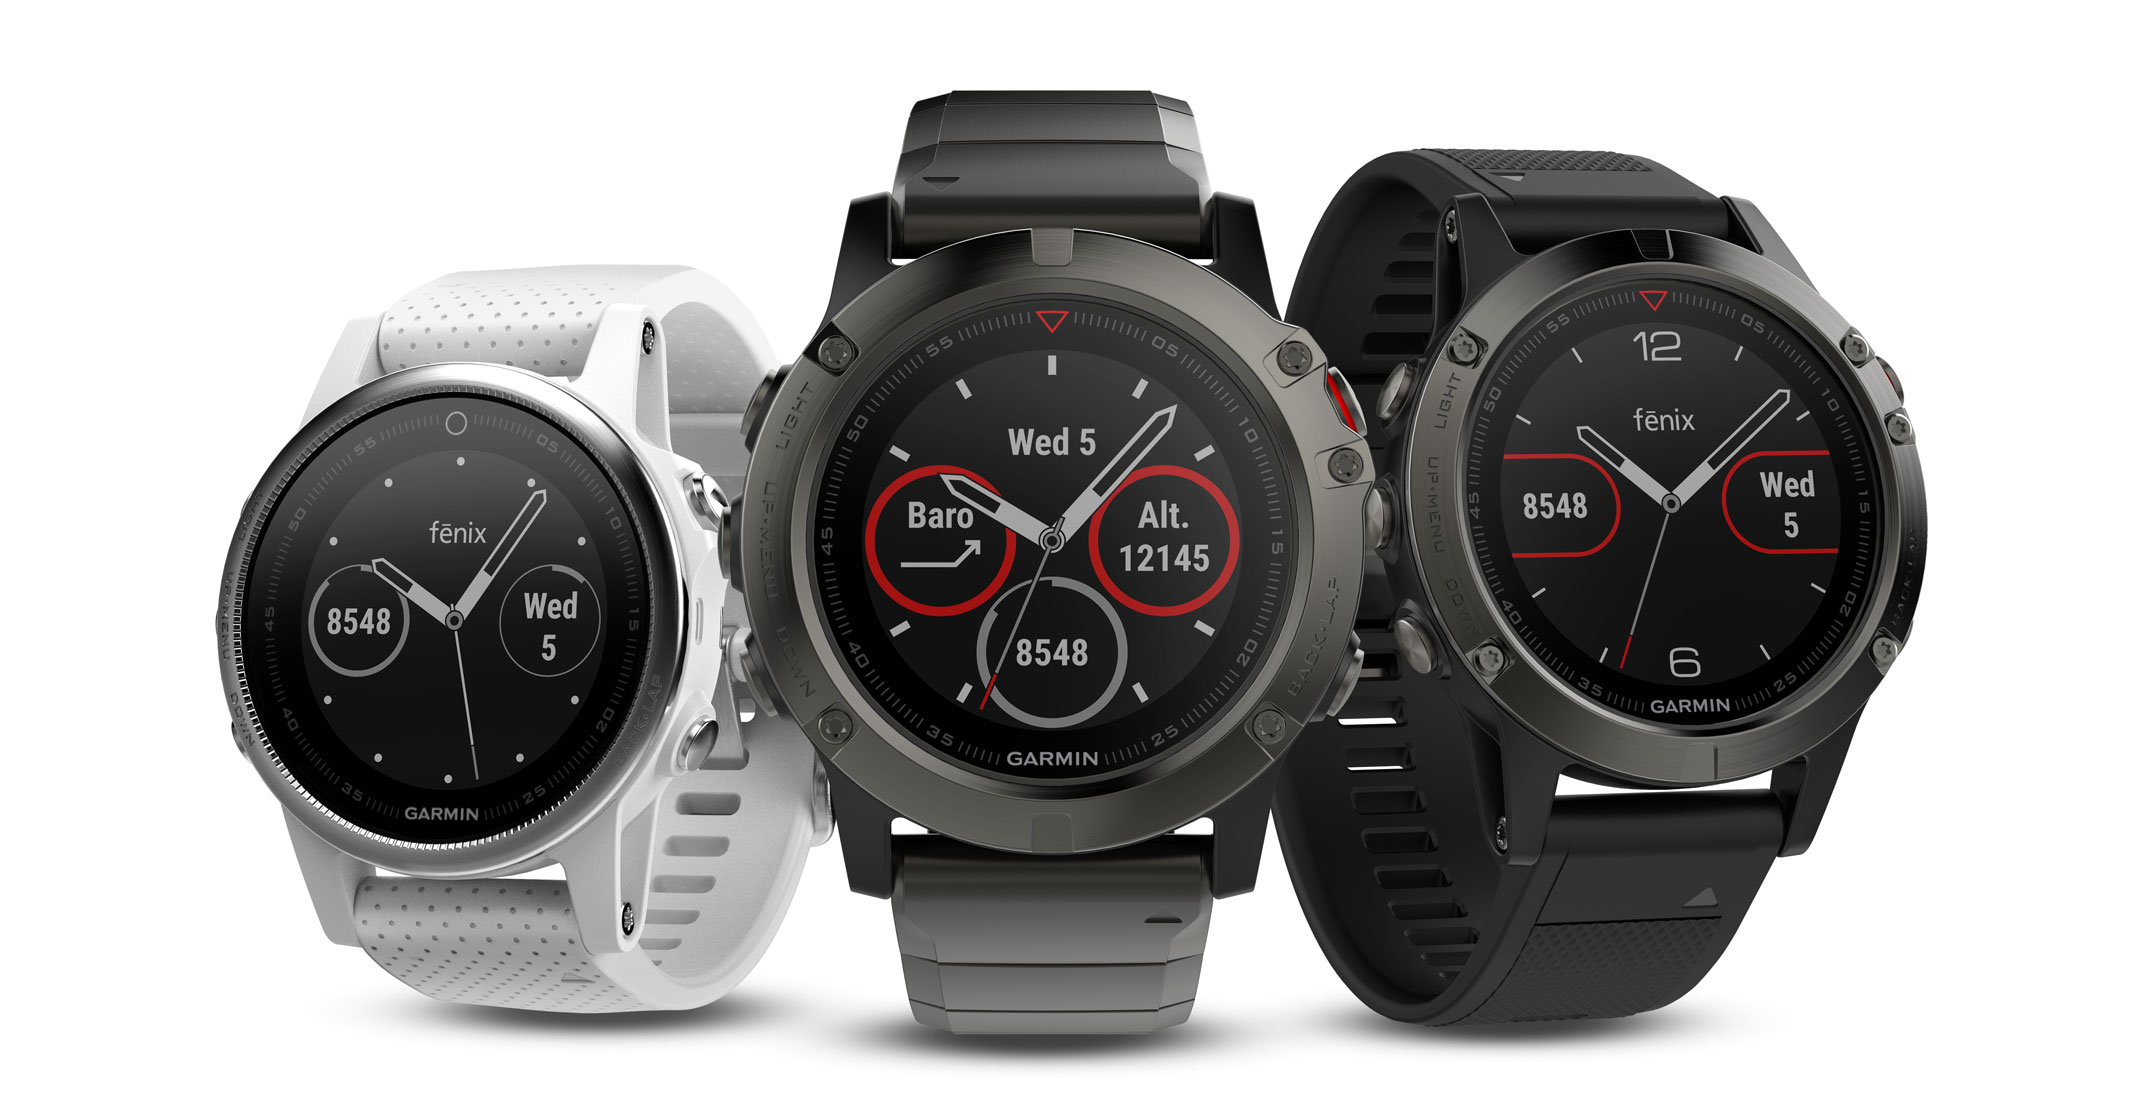 FNB tap-to-pay comes to Garmin, Fitbit watches - TechCentral